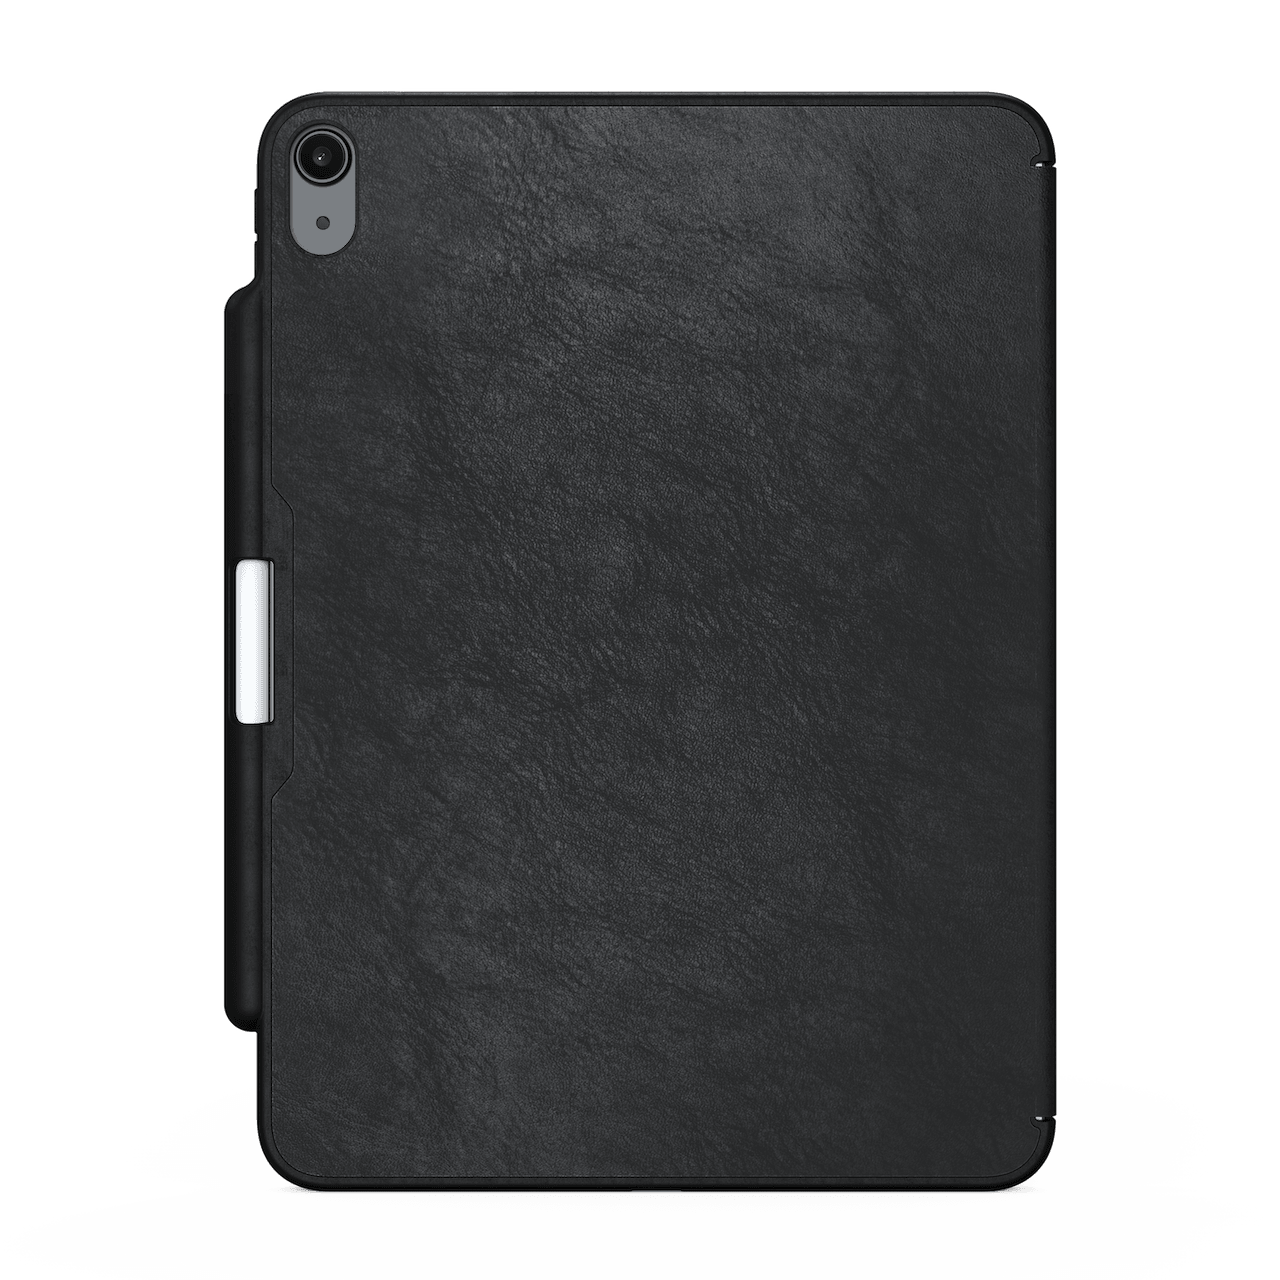 MoArmouz - Folio Smart Cover for iPad Air (5th Gen/4th Gen), 10.9" [Apple Pencil Pair & Charge Supported]